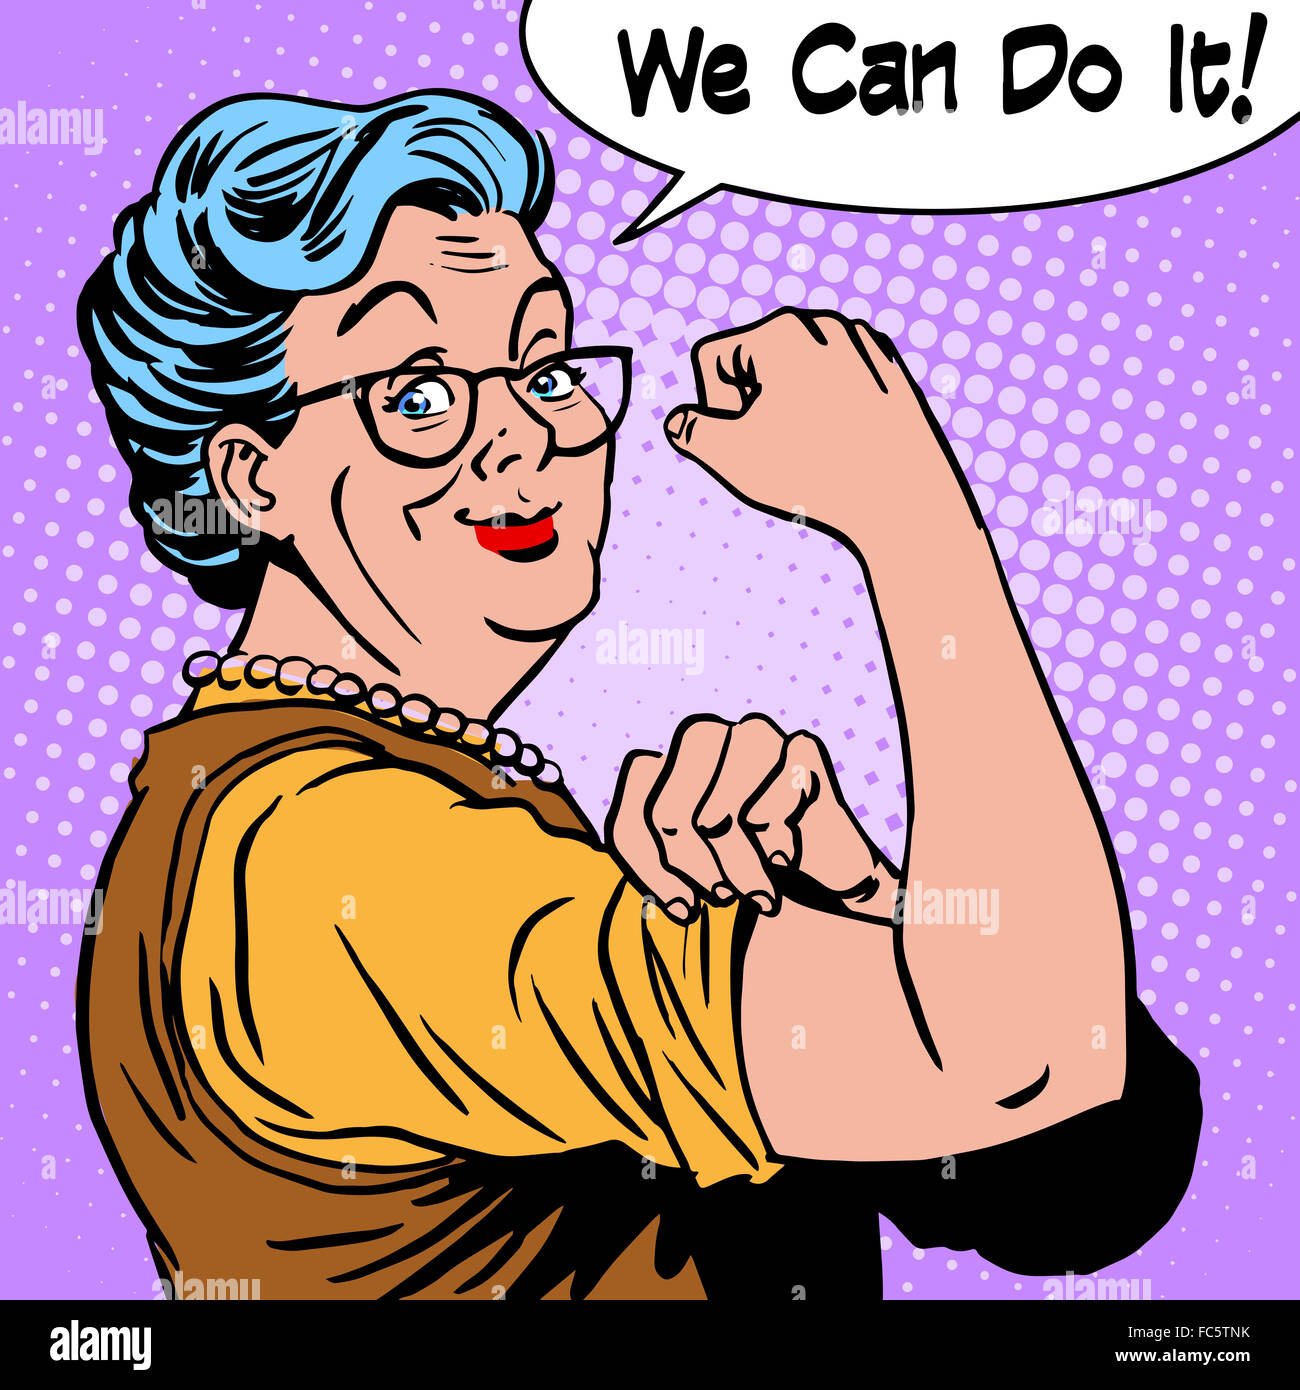 Granny old woman gesture we can do it Stock Photo